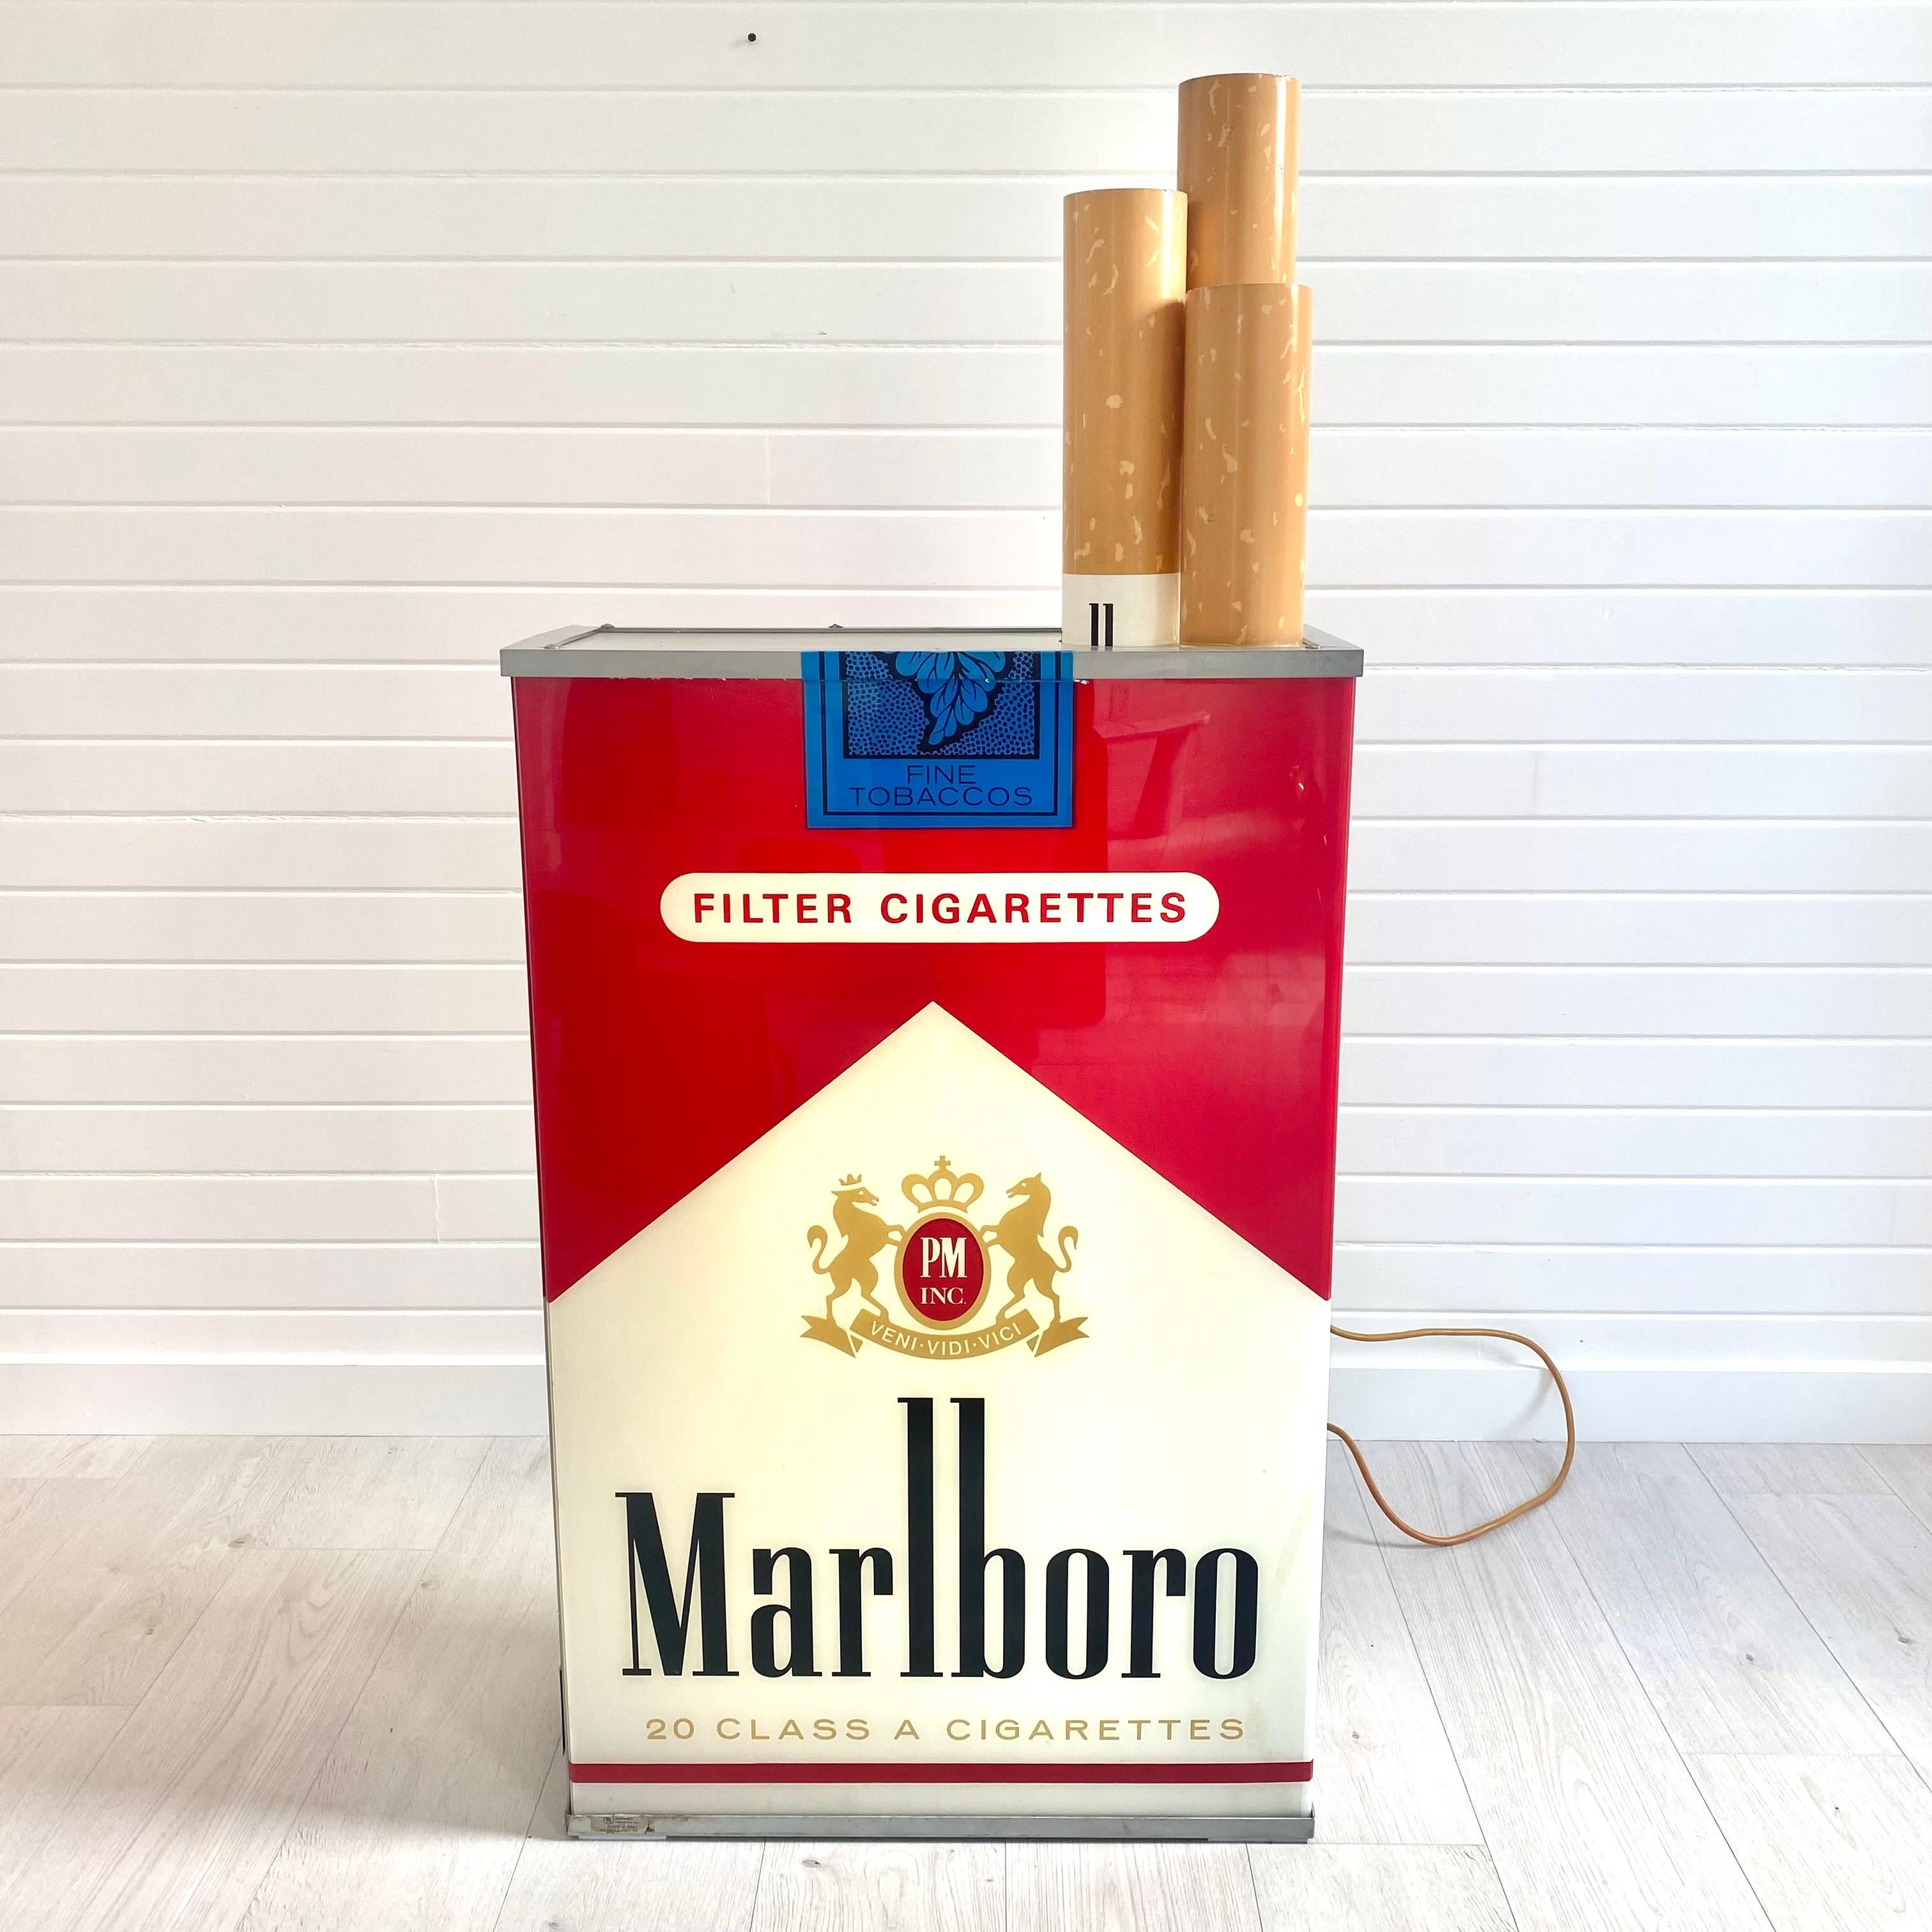 Fantastic vintage advertising light up box by Marlboro. A relic of 90's commercial culture. Massive scale. Double sided. Good condition with wear as shown. Looks great hanging on the wall or on the ground. Acrylic sides and cigarettes with metal